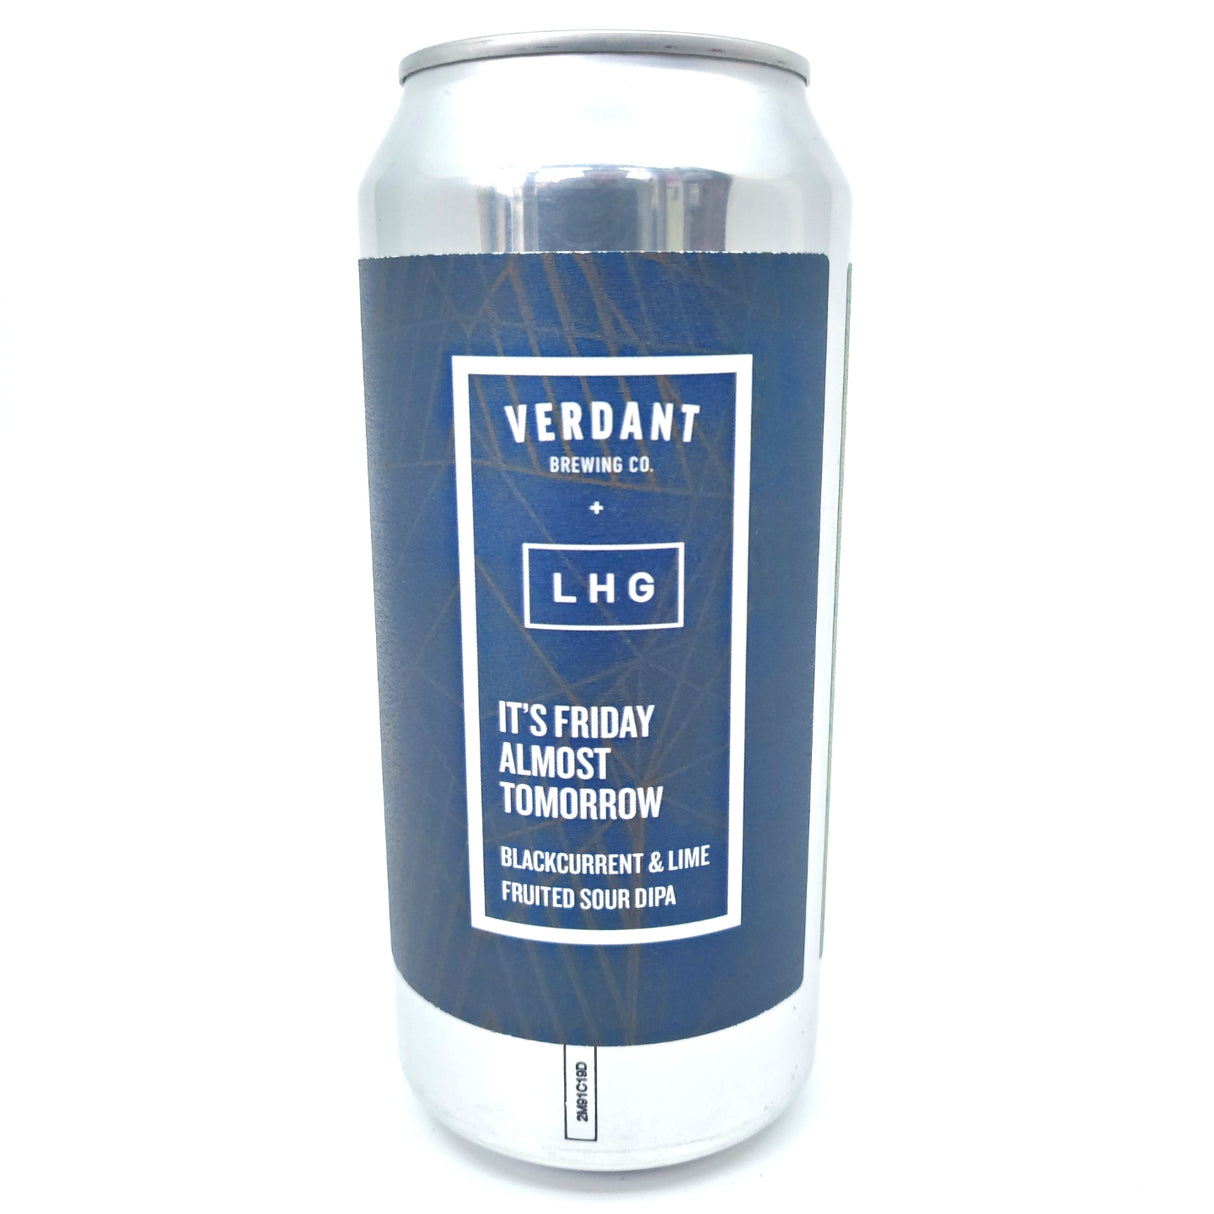 Verdant x Left Handed Giant It's Friday Almost Tomorrow DIPA 8.4% (440ml can)-Hop Burns & Black